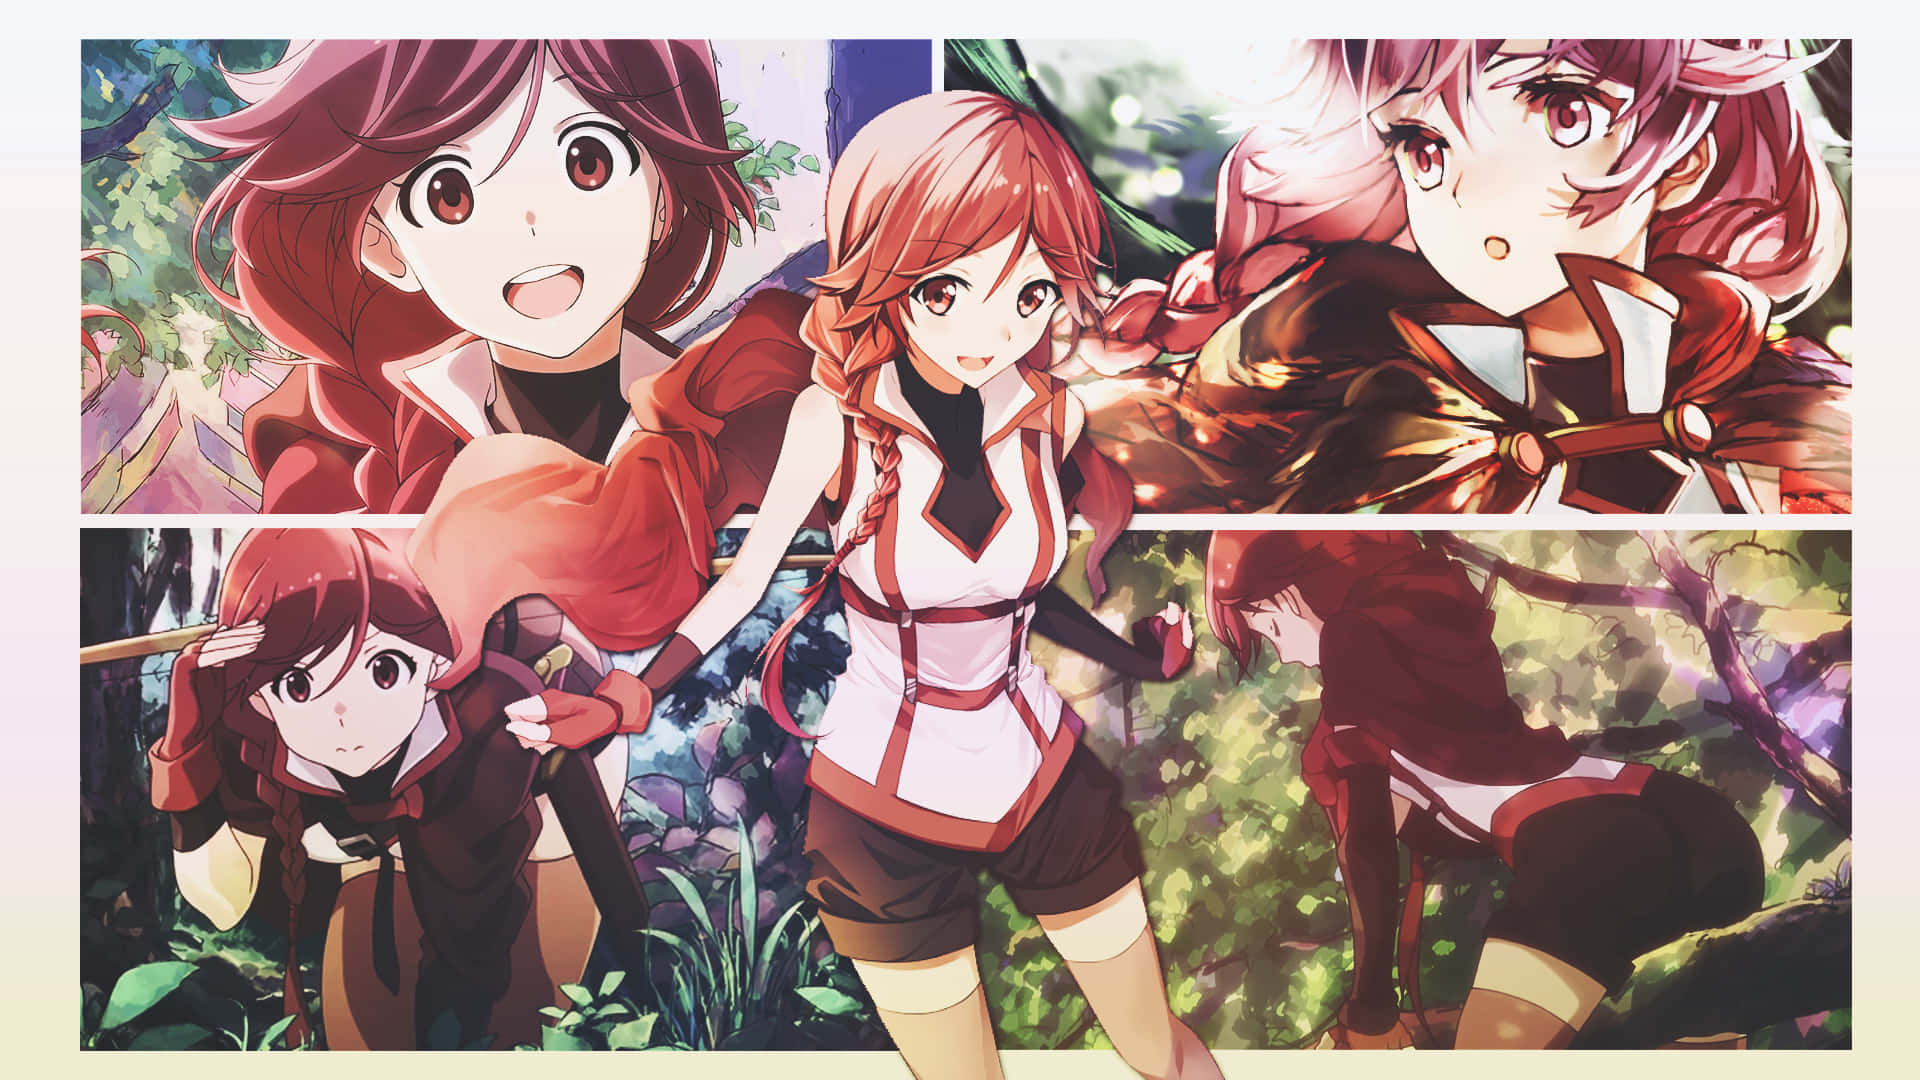 “The intrepid adventurers of Grimgar of Fantasy and Ash battle their way to victory” Wallpaper